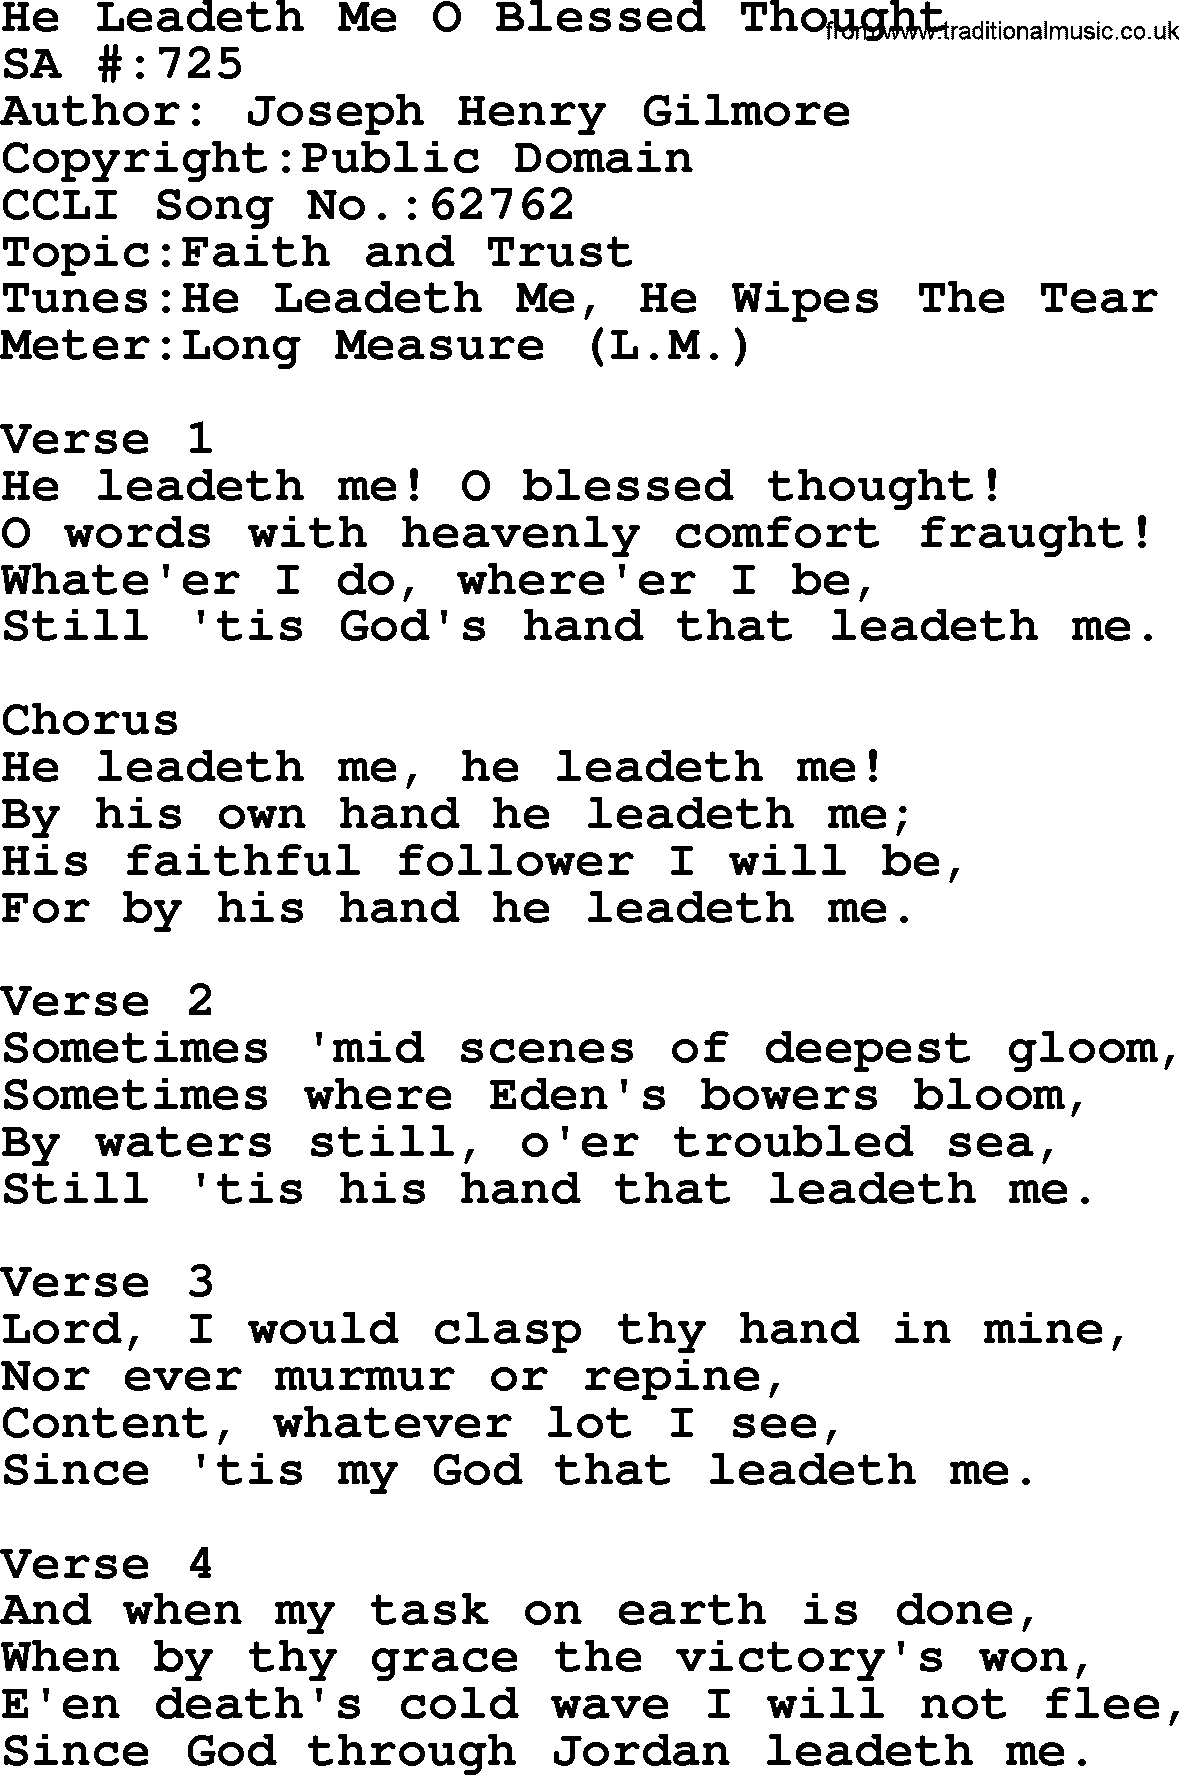 Salvation Army Hymnal, title: He Leadeth Me O Blessed Thought, with lyrics and PDF,